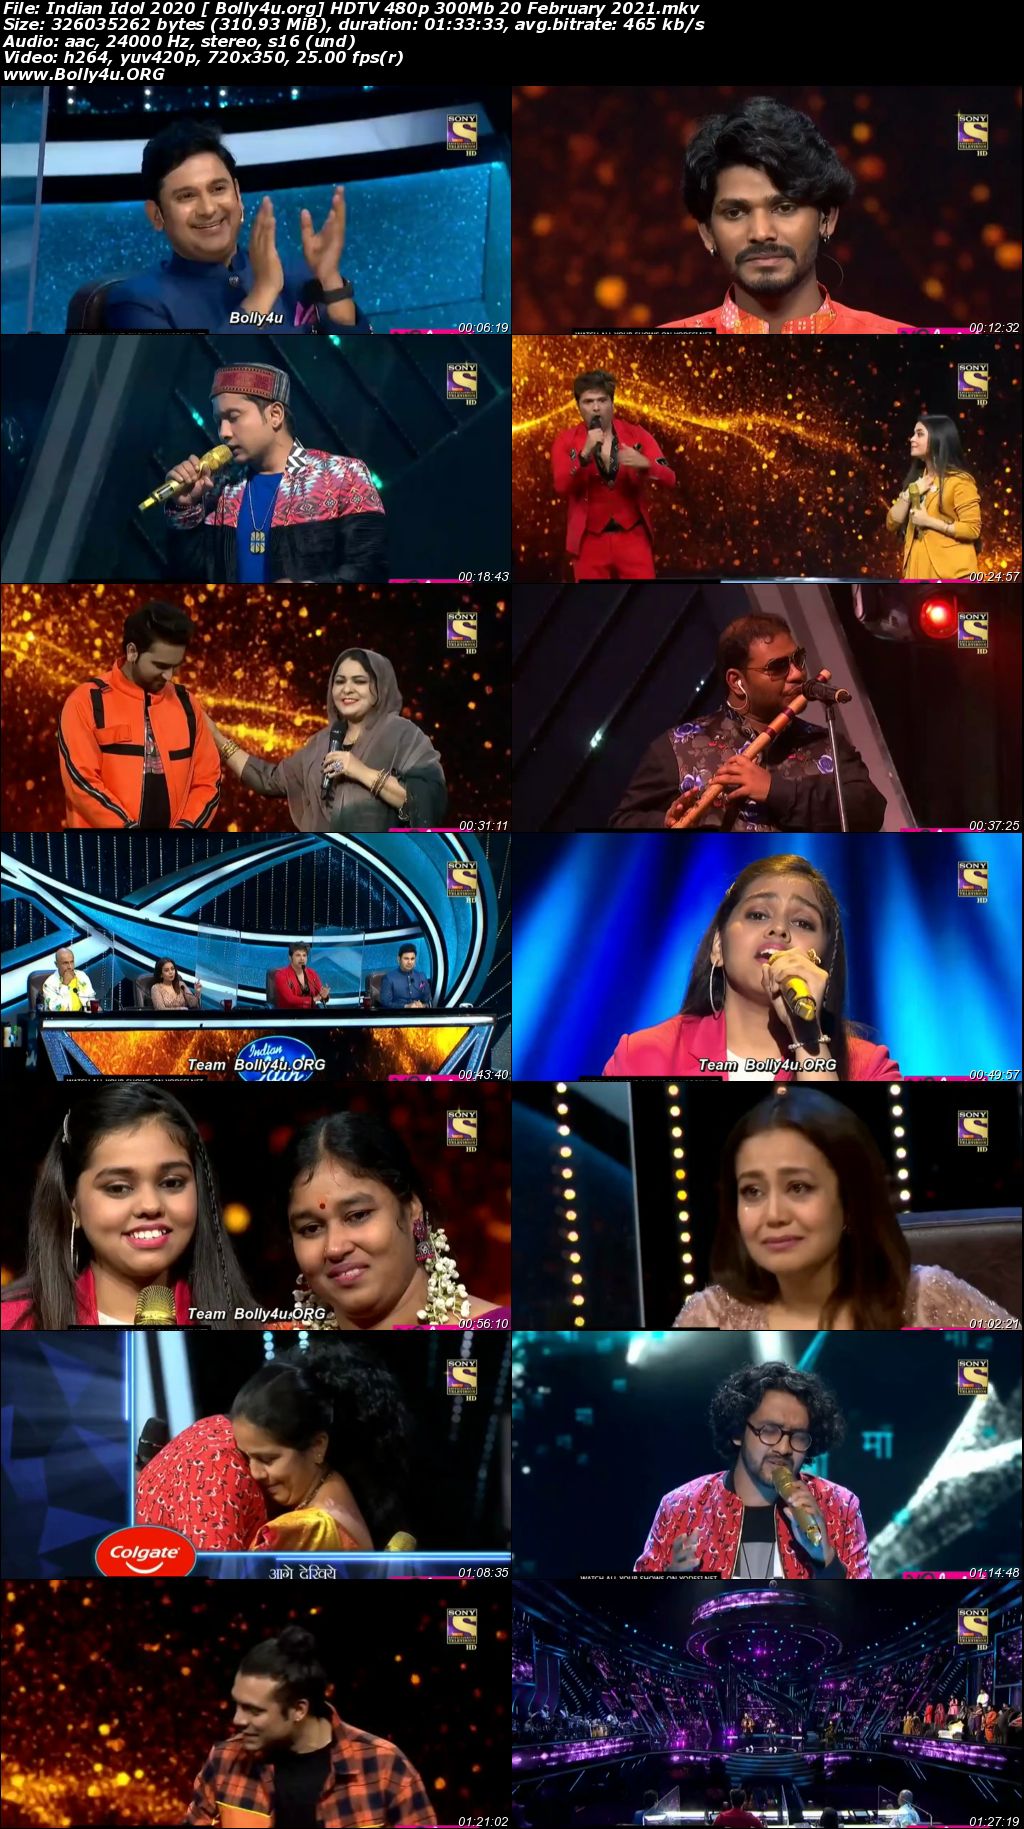 Indian Idol 2021 HDTV 480p 300Mb 20 February 2021 Download